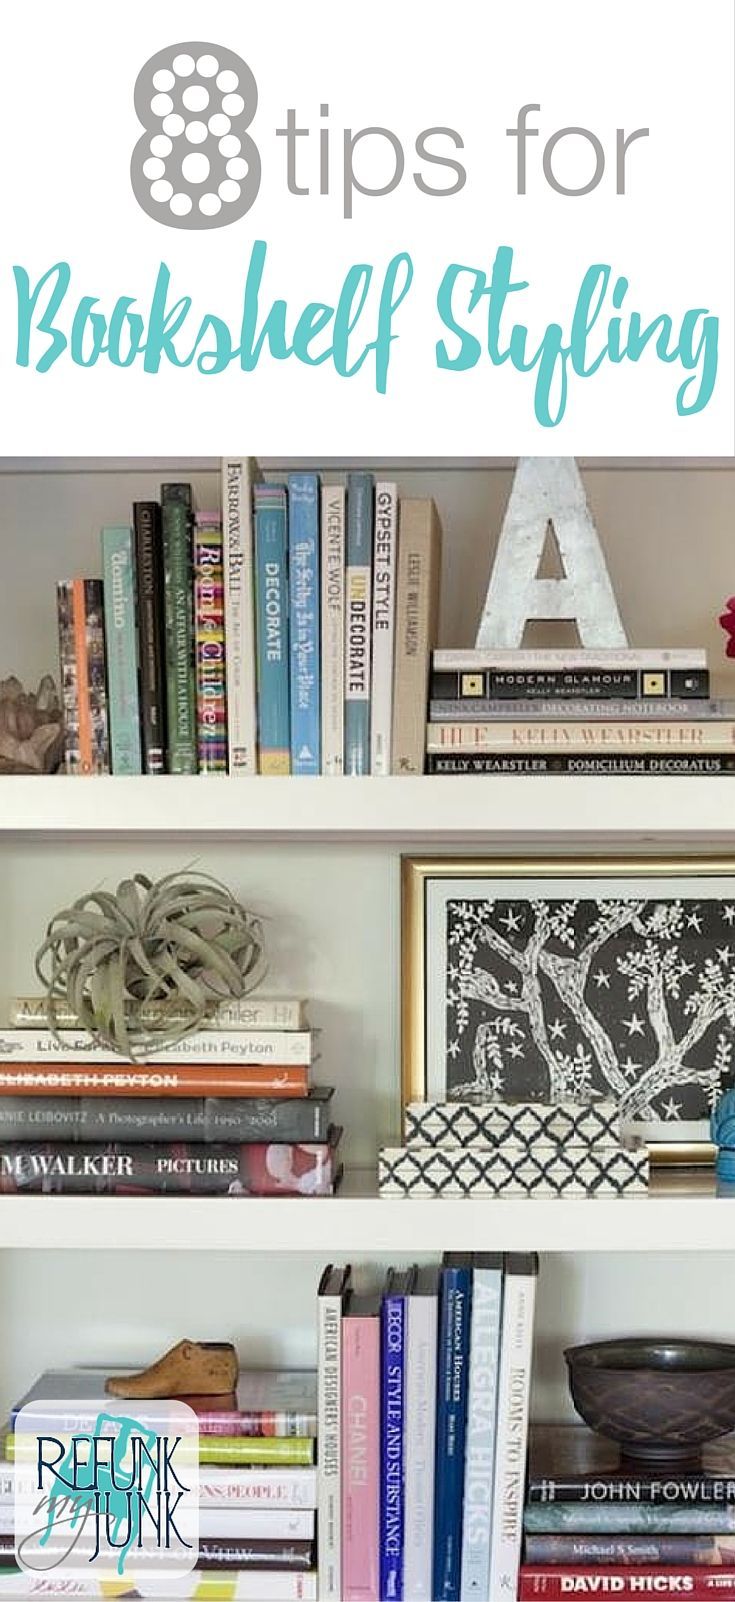 8 Tips for bookshelf styling. Decorating a bookshelf can be overwhelming here are some simple bookshelf styling guidelines –